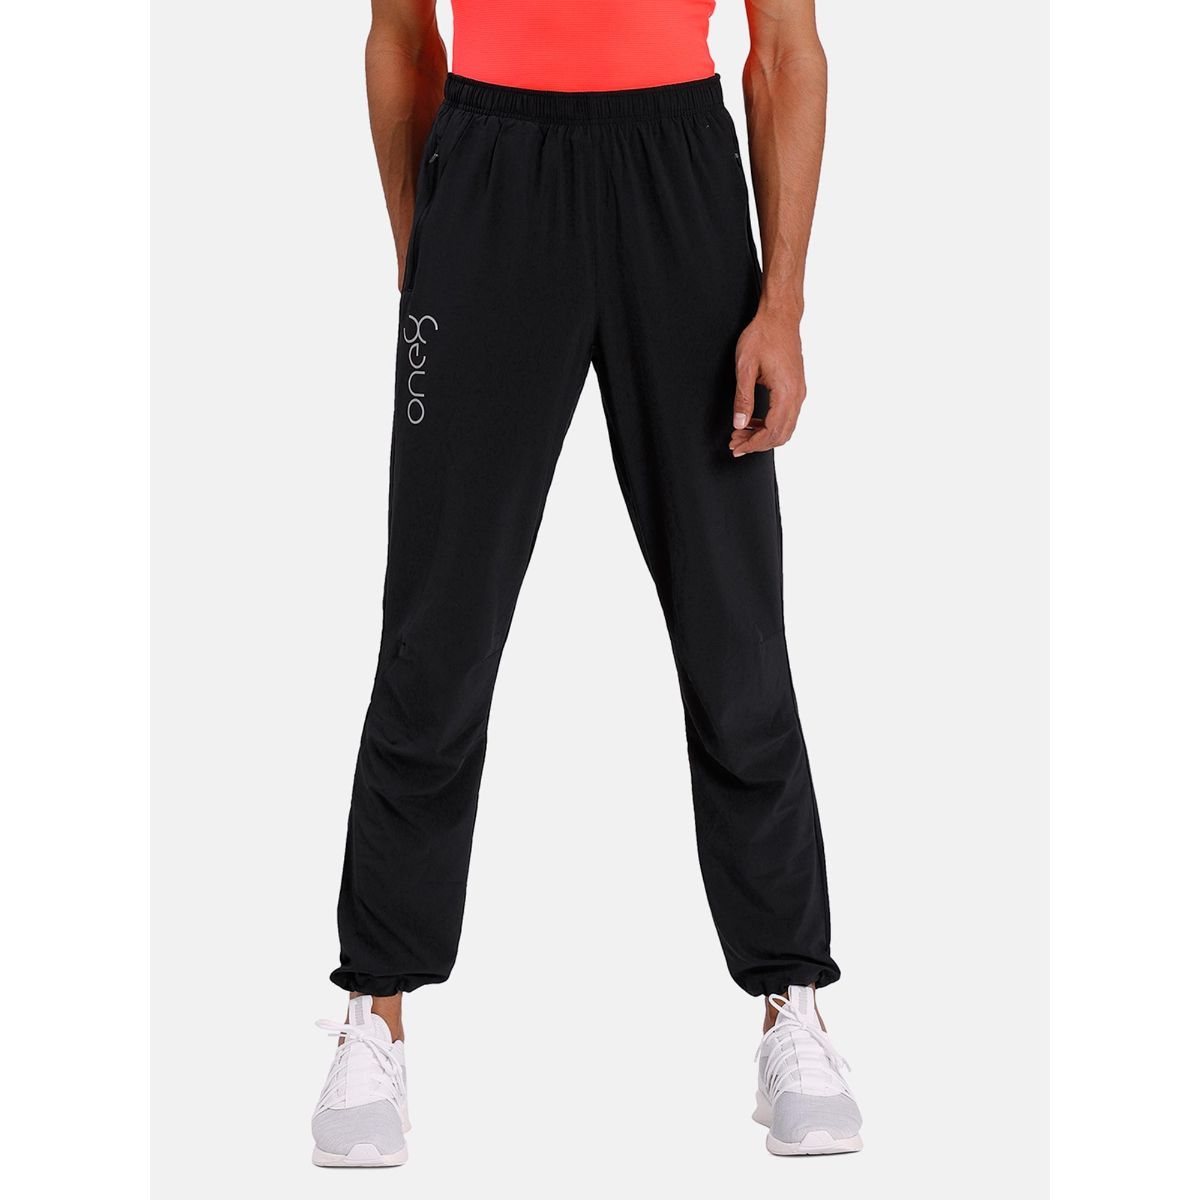 Buy PUMA Men's Grey one8 Track Pant Online at Low Prices in India -  Paytmmall.com